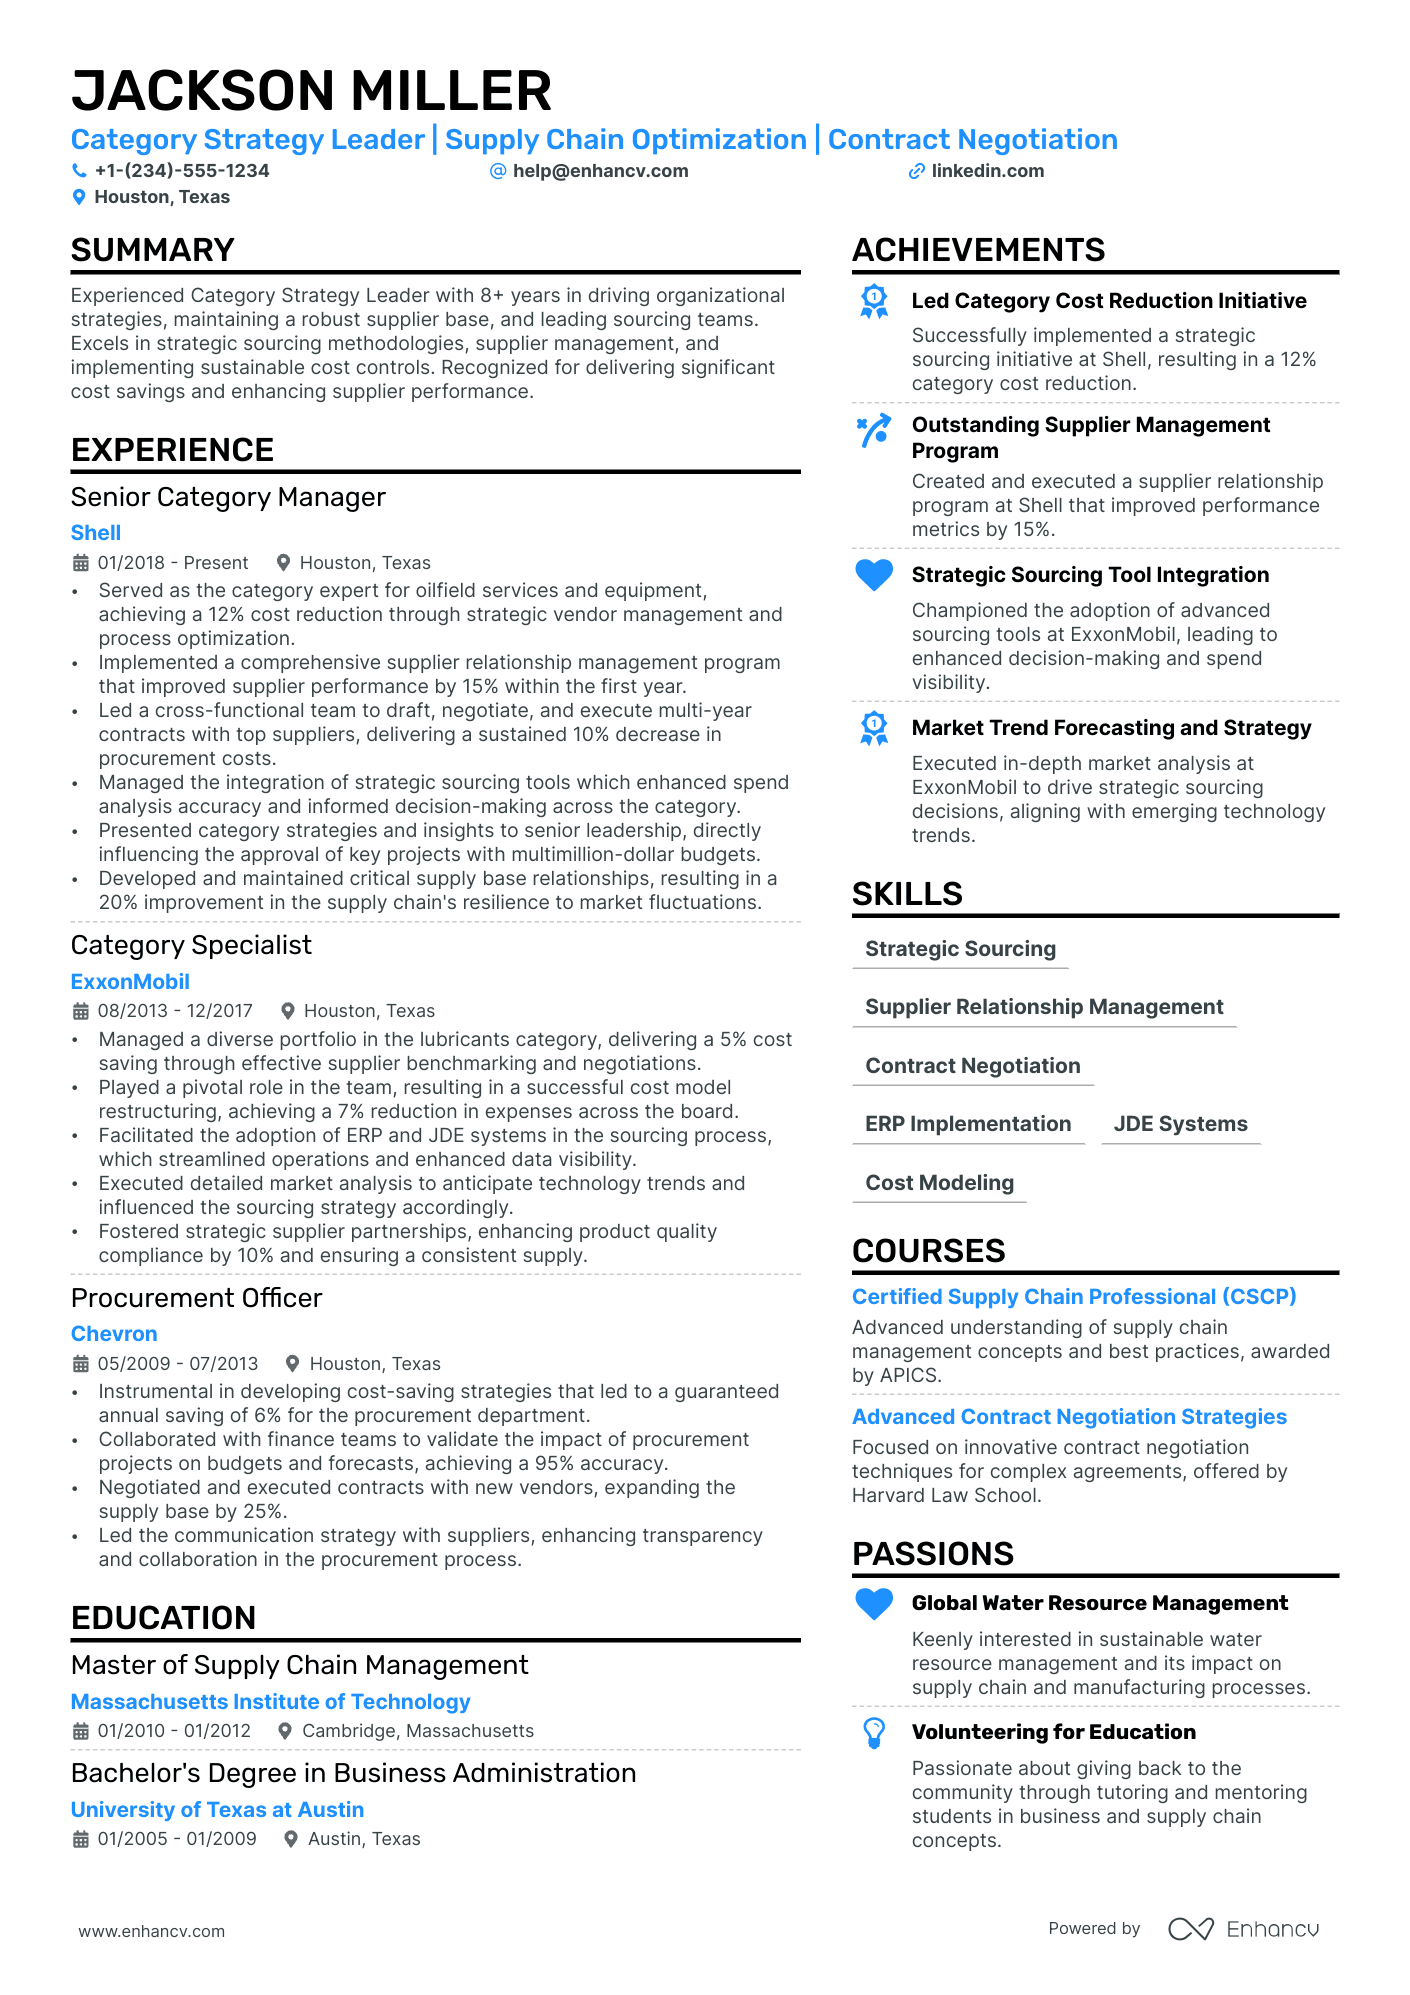 Commodity Manager resume example